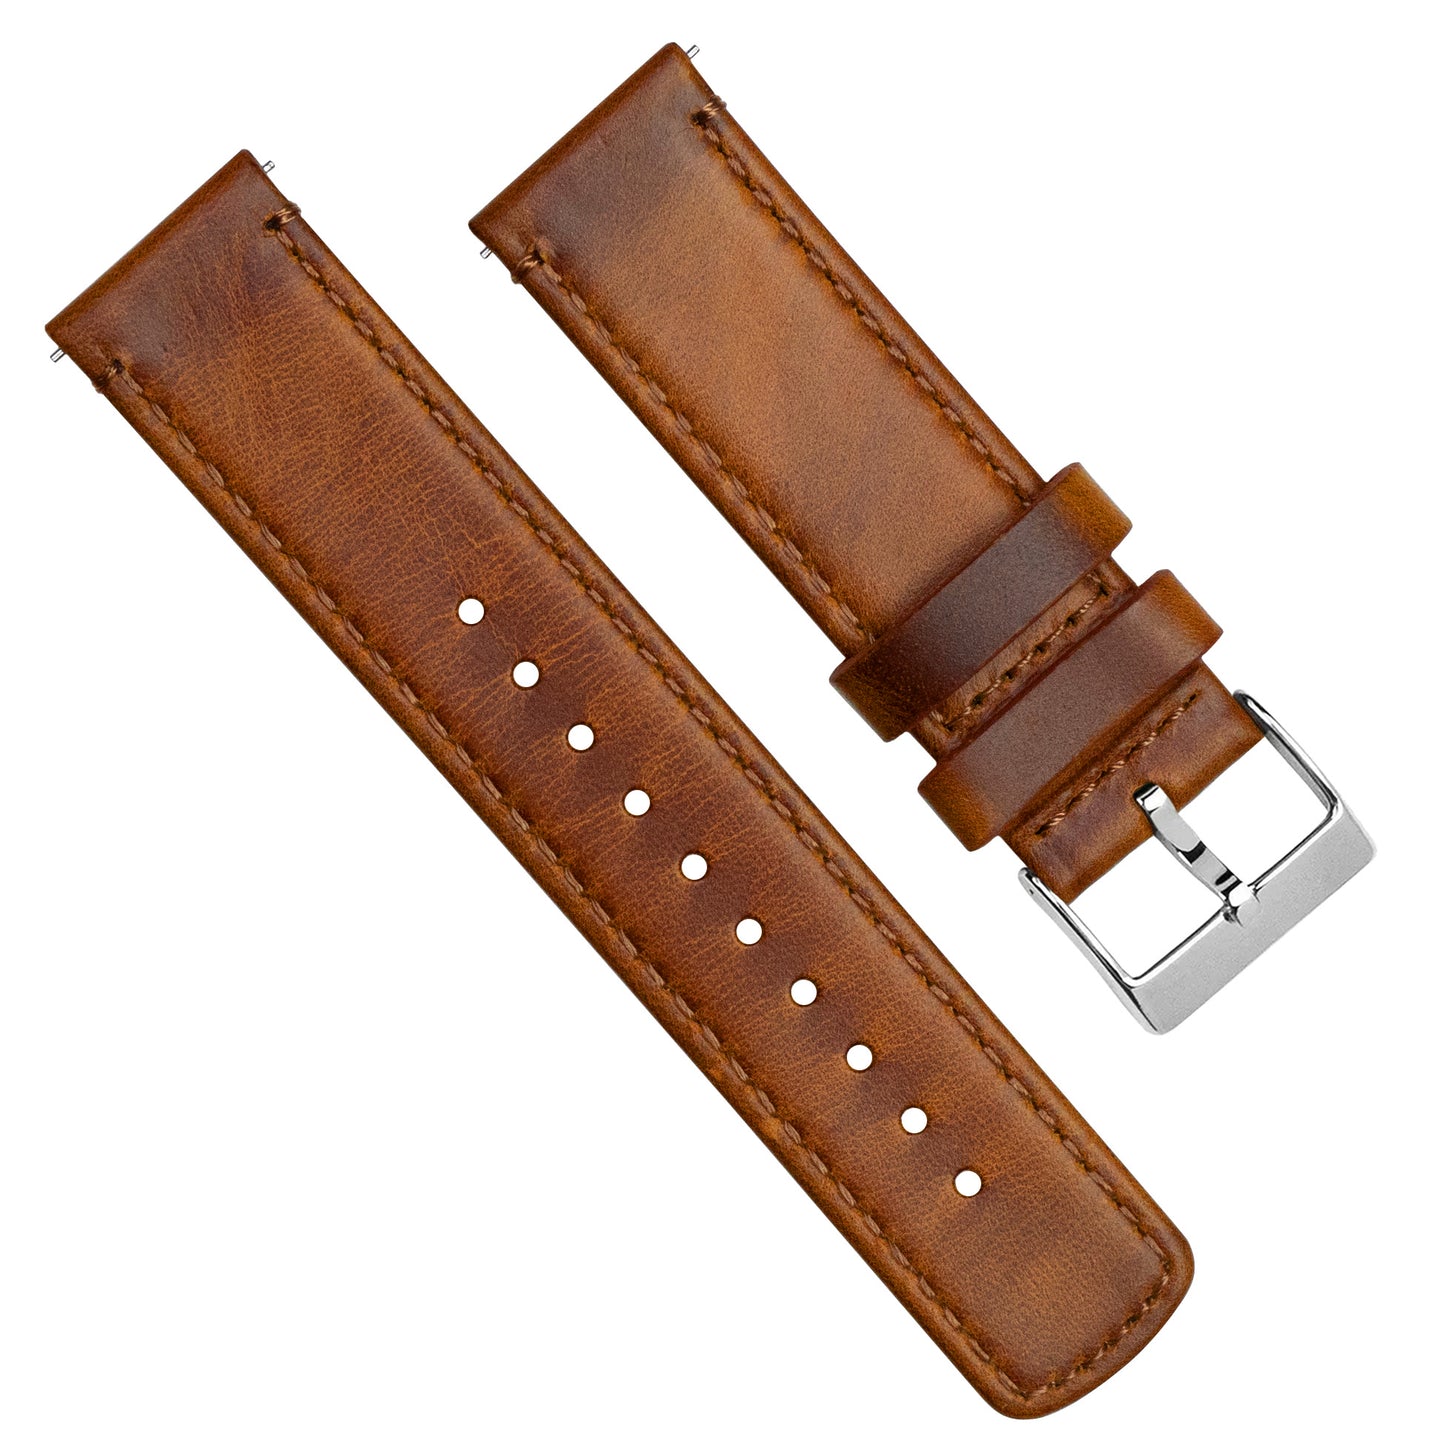 Weathered Brown Leather Watch Band